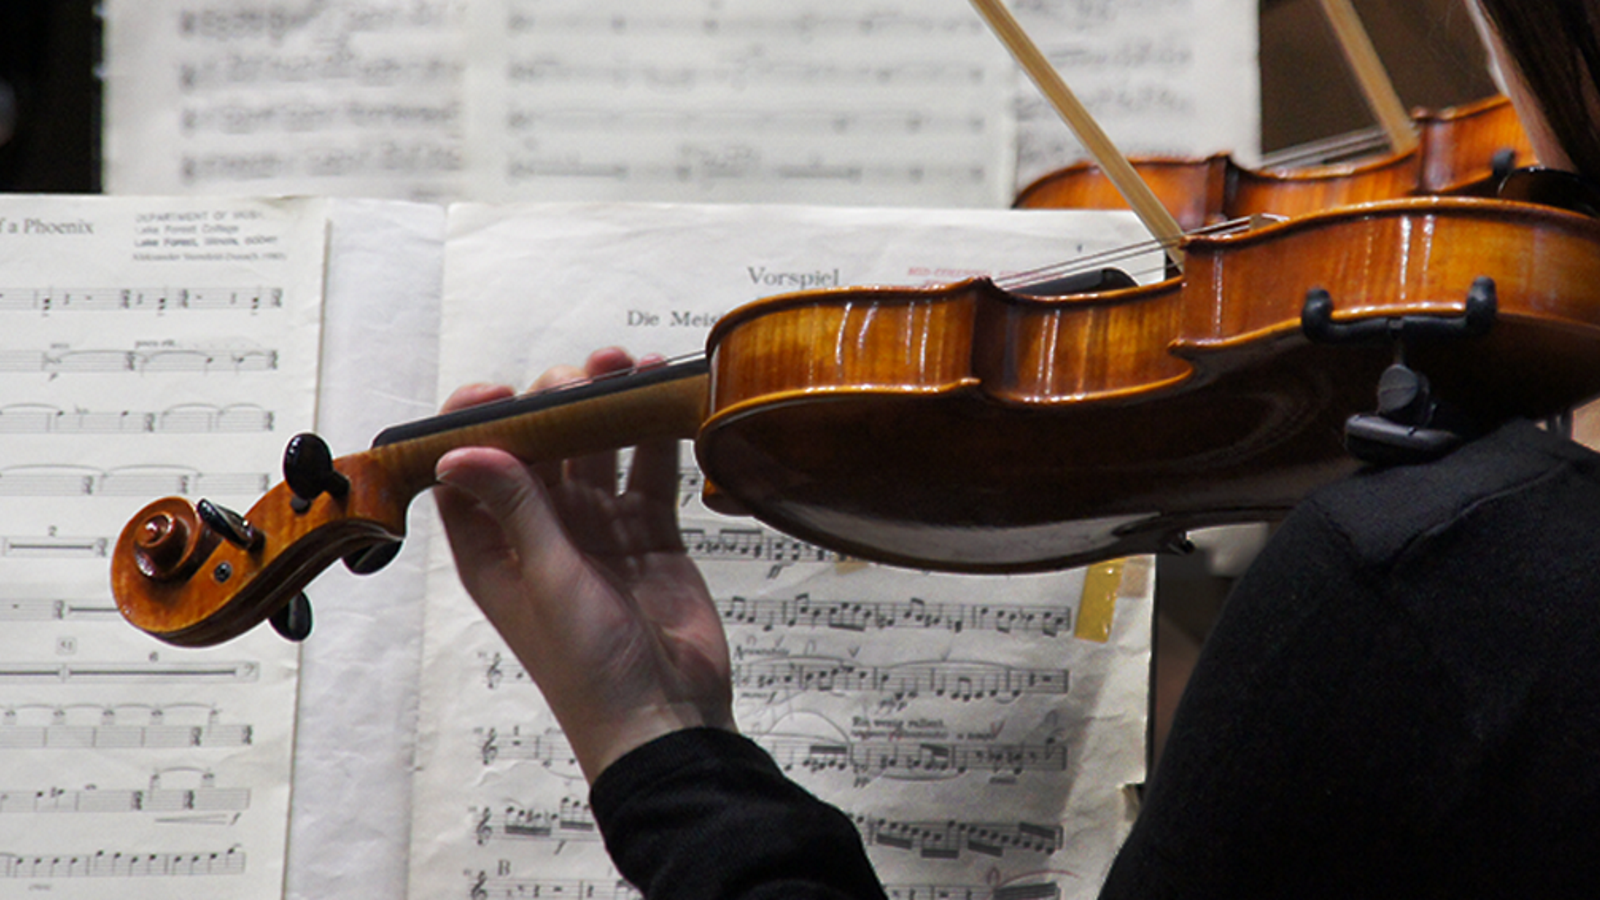 violin being played in front of sheet music